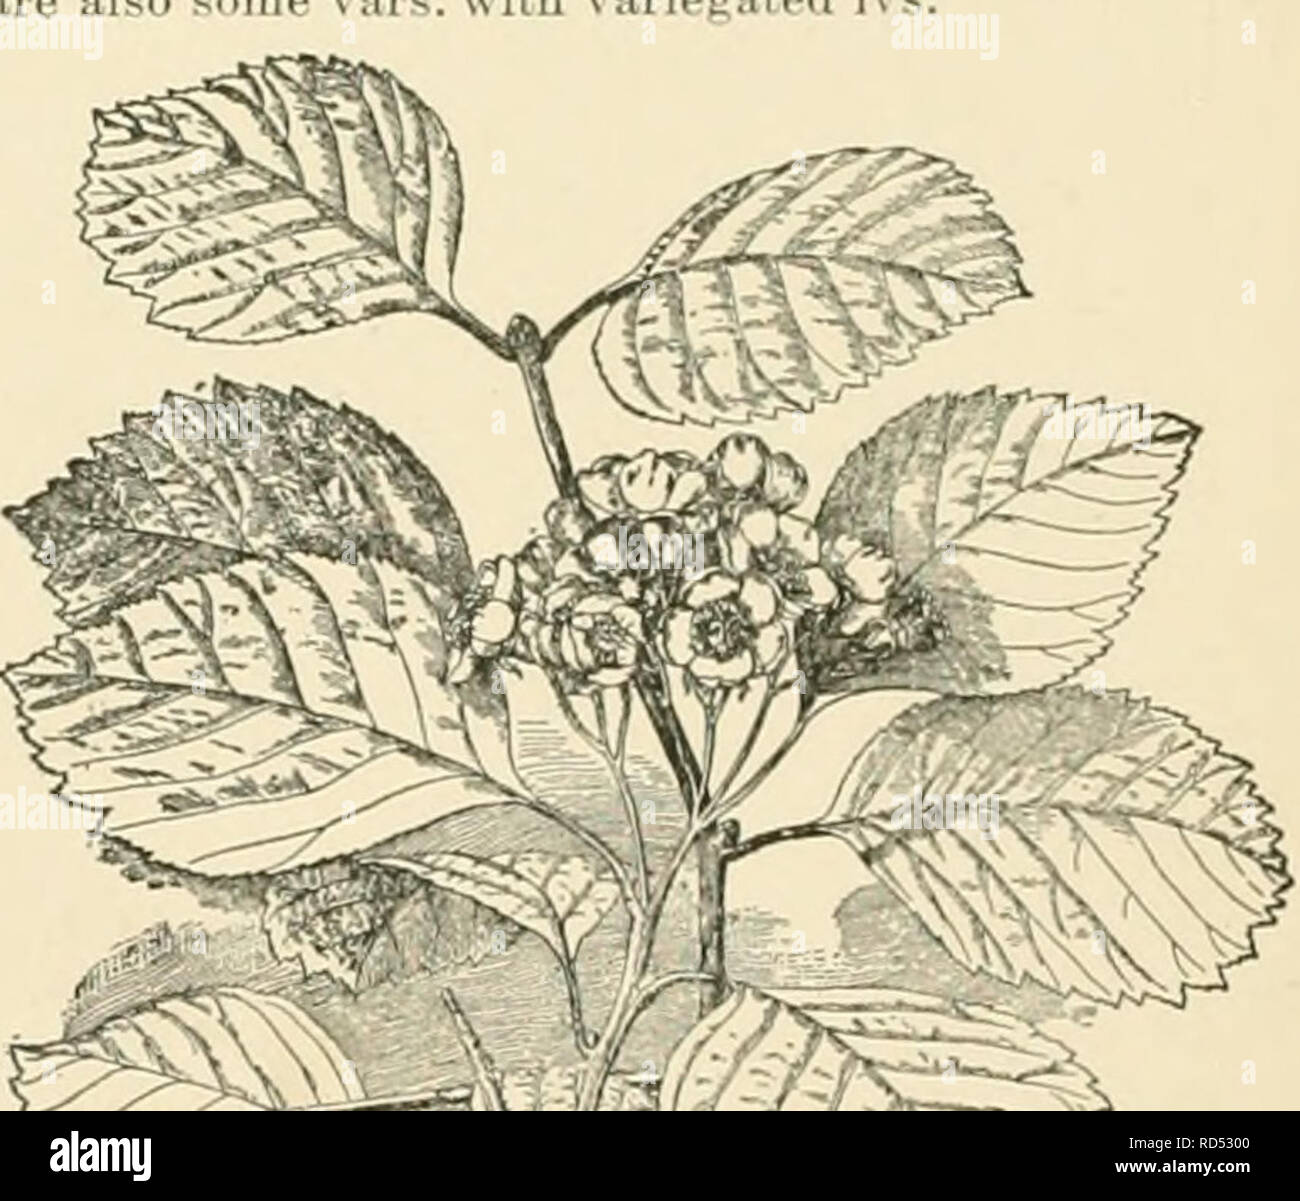 . Cyclopedia of American horticulture, comprising suggestions for cultivation of horticultural plants, descriptions of the species of fruits, vegetables, flowers, and ornamental plants sold in the United States and Canada, together with geographical and biographical sketches. Gardening. 576 Crataegus punctata lous; fls. fragrant; calyx-teeth glandular-serrate: fr. % in. in dlam. May, June. Quebec to Va., west to Mo. and Dak. S.S. 4:181. B.R. 22:1912. L.B.C. 11:1012 (as C. glandulosa). A.G. H:509.-Sometimes cultivated under the name of C. Douglasi. Var. suocul^nta, Rehd. {C. succuUnta, Schrad.) Stock Photo